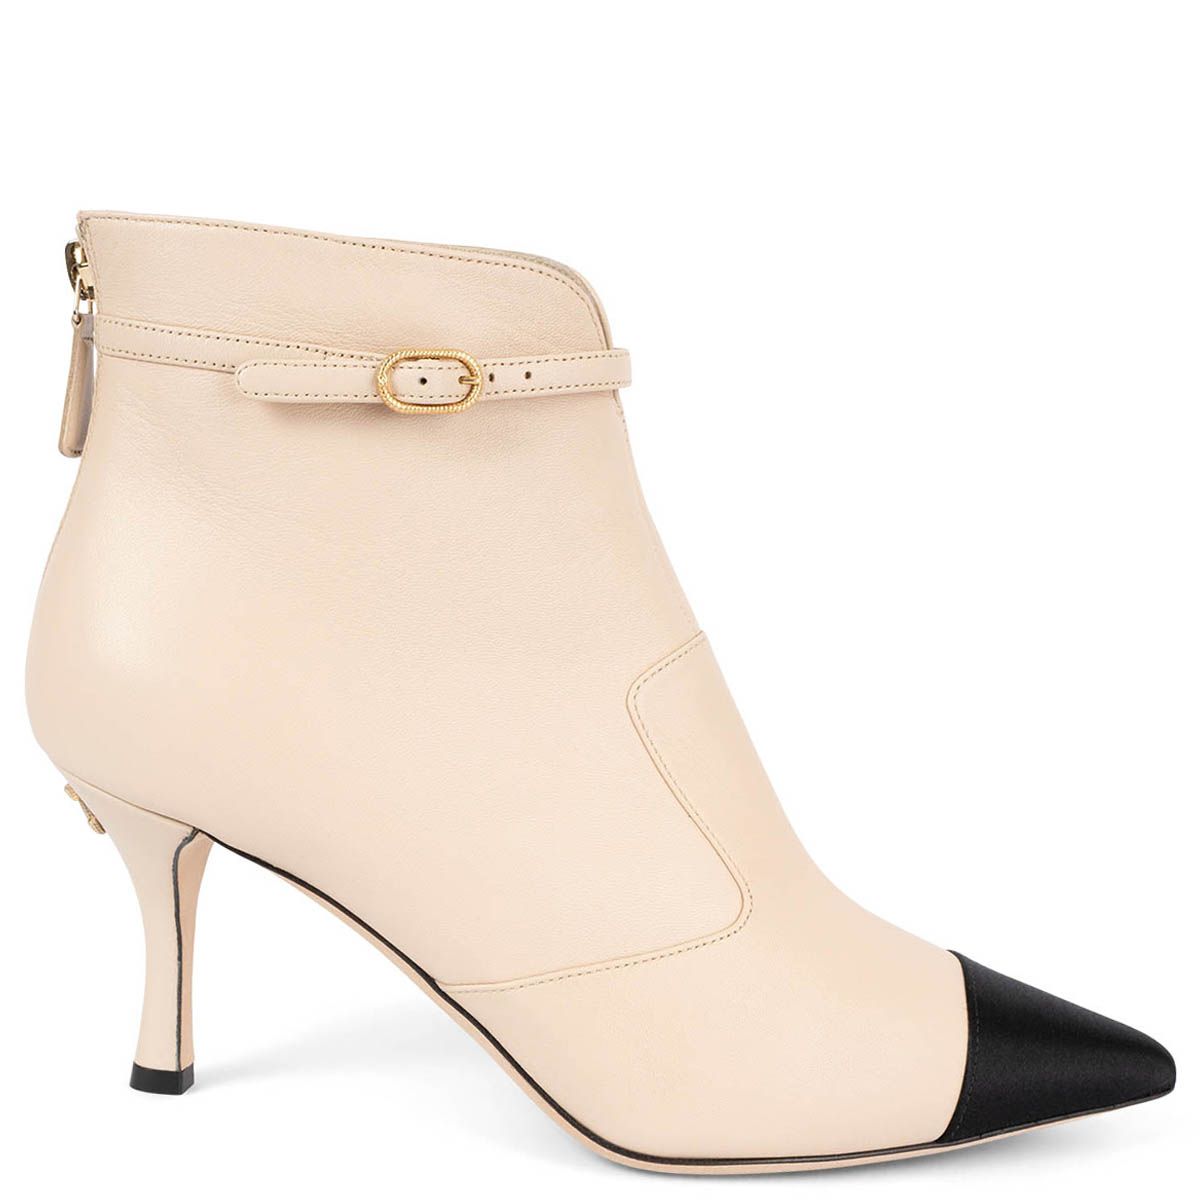 Chanel Pointed Toe Ankle Booties Beige Leather 38 G35367